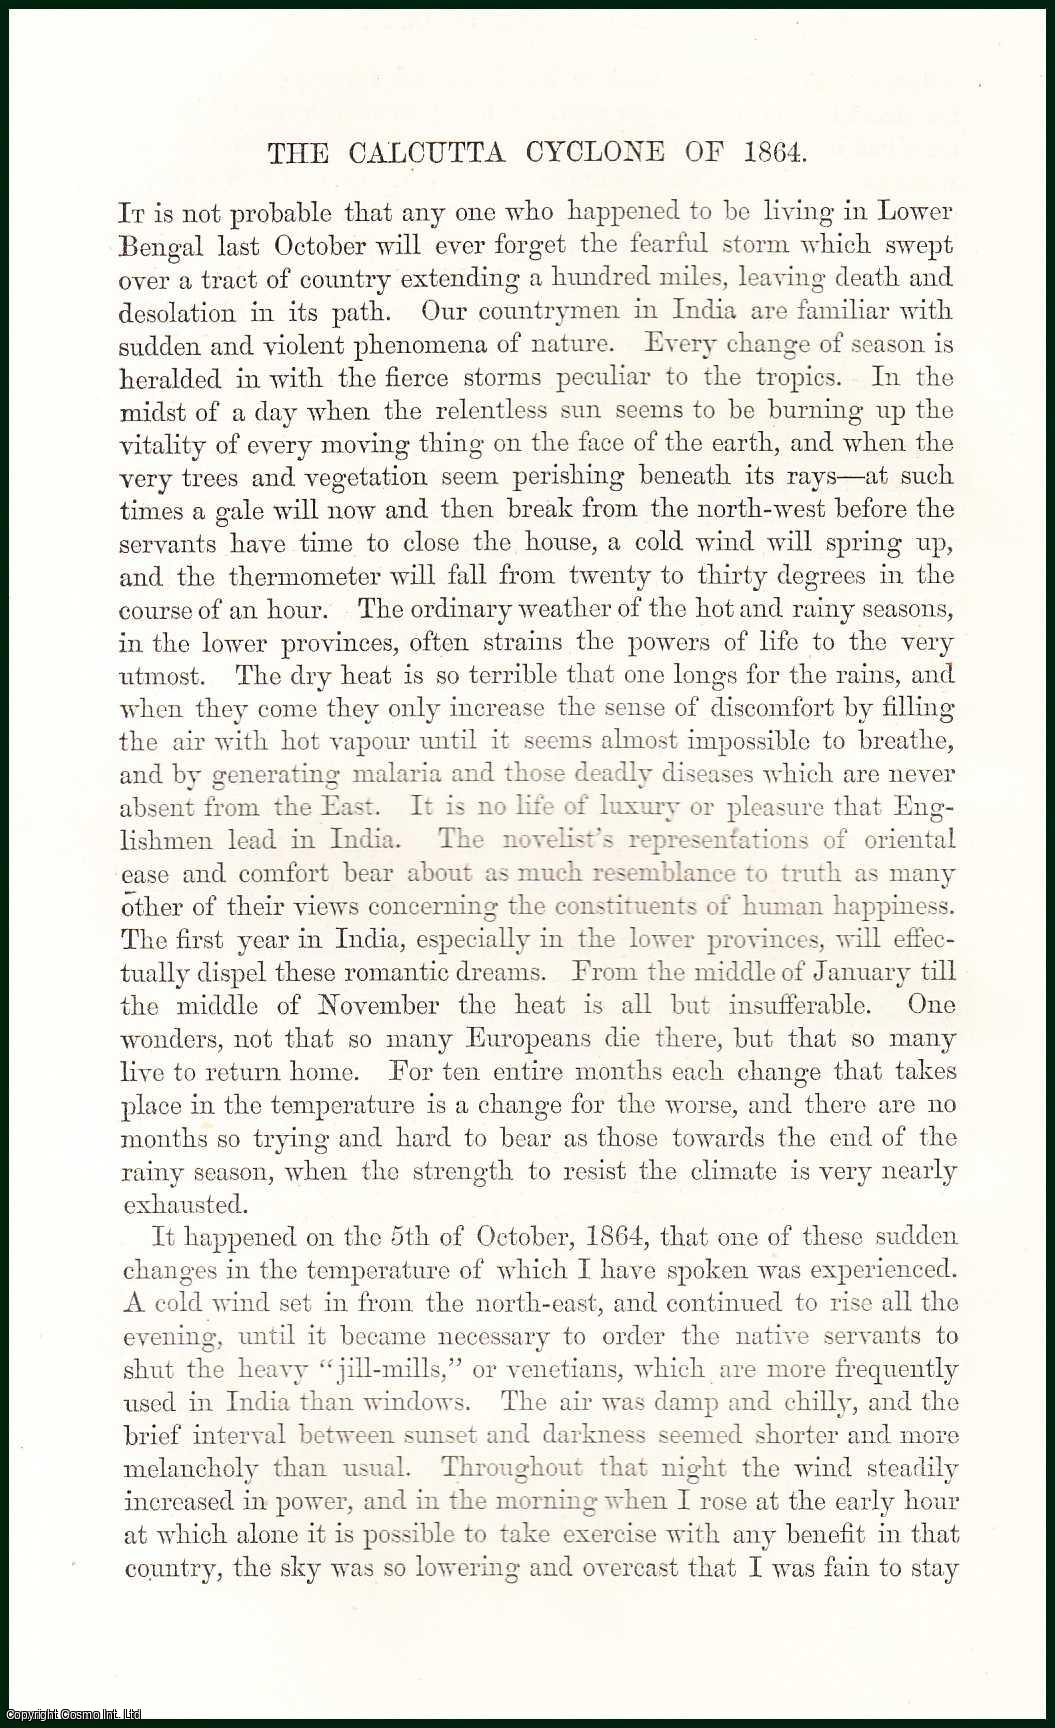 L.J. Jennings - The Calcutta Cyclone of 1864, Bengal : The Fearful Storm which Swept over a Tract of Country Extending a hundred Miles, Leaving Death & Desolation in its Path. An uncommon original article from The Fortnightly Review, 1865.